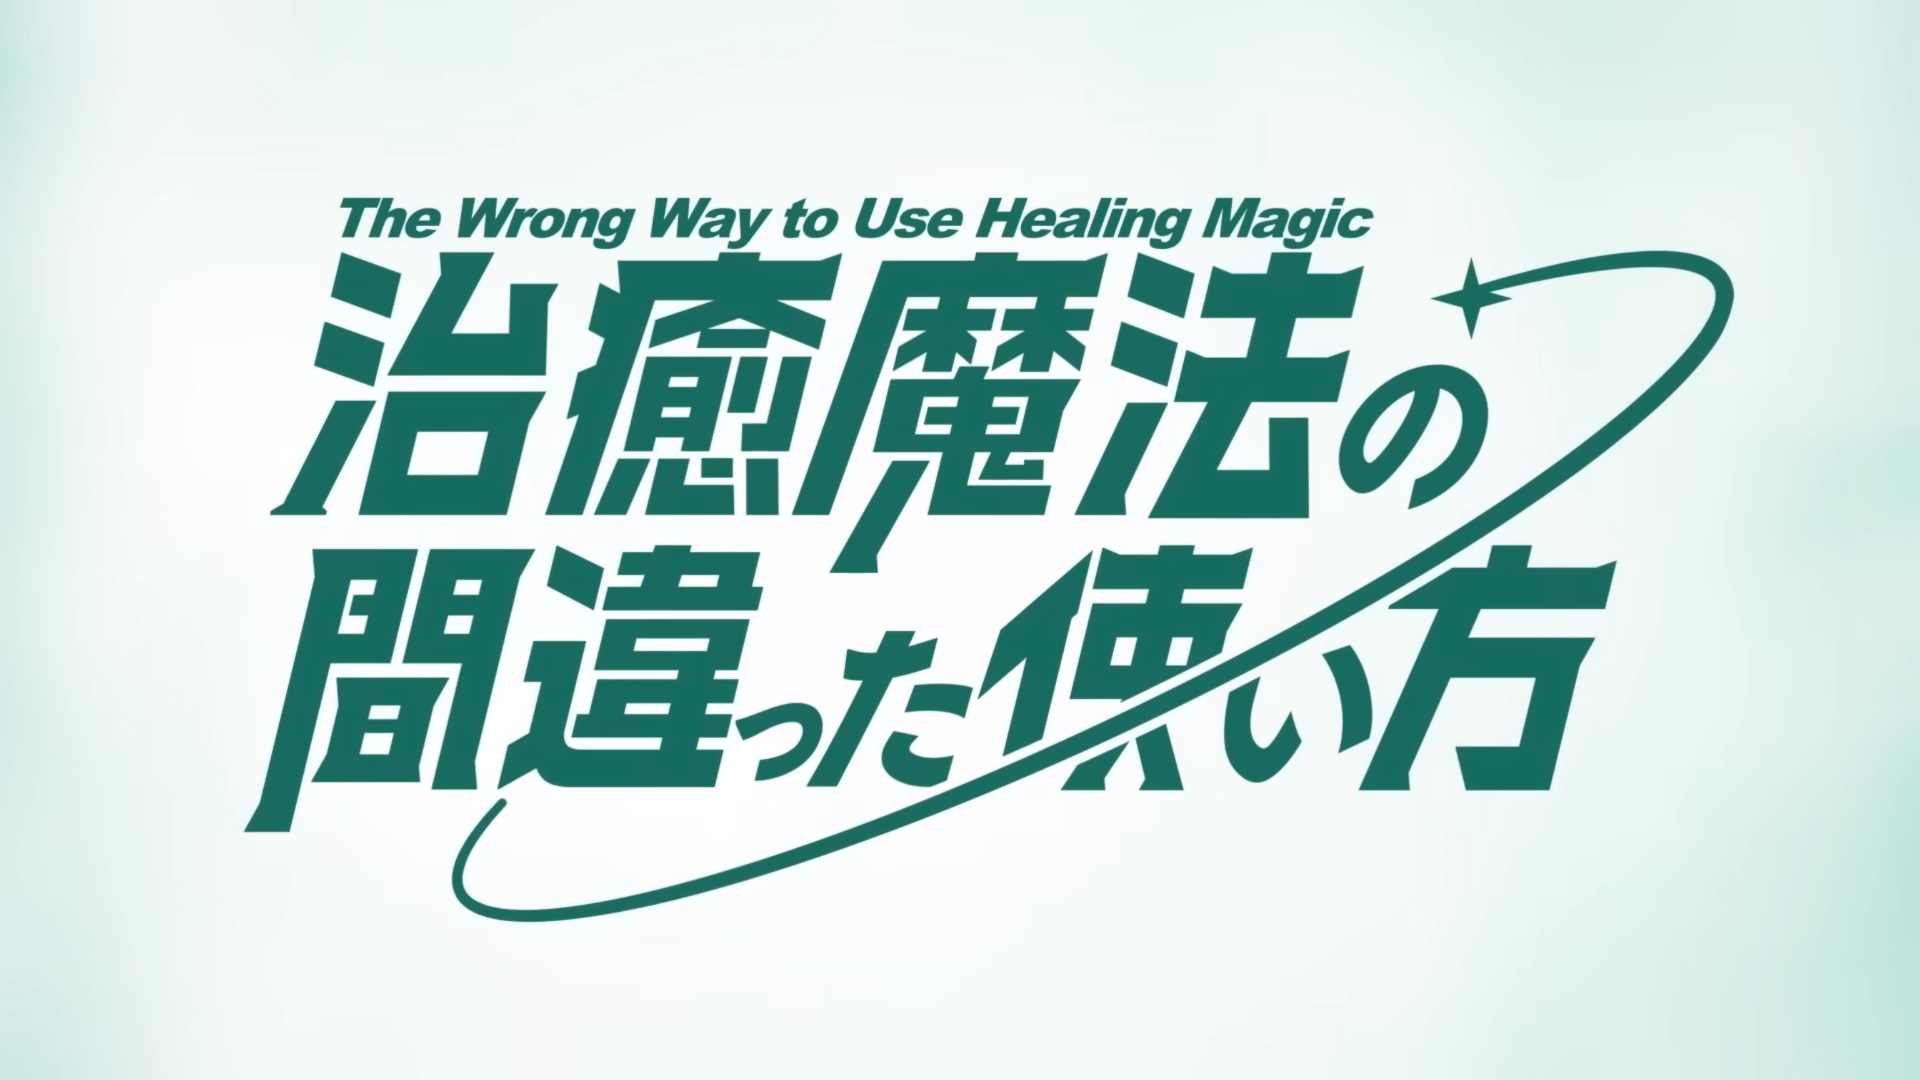 The Wrong Way To Use Healing Magic arrives on Crunchyroll January 5th!